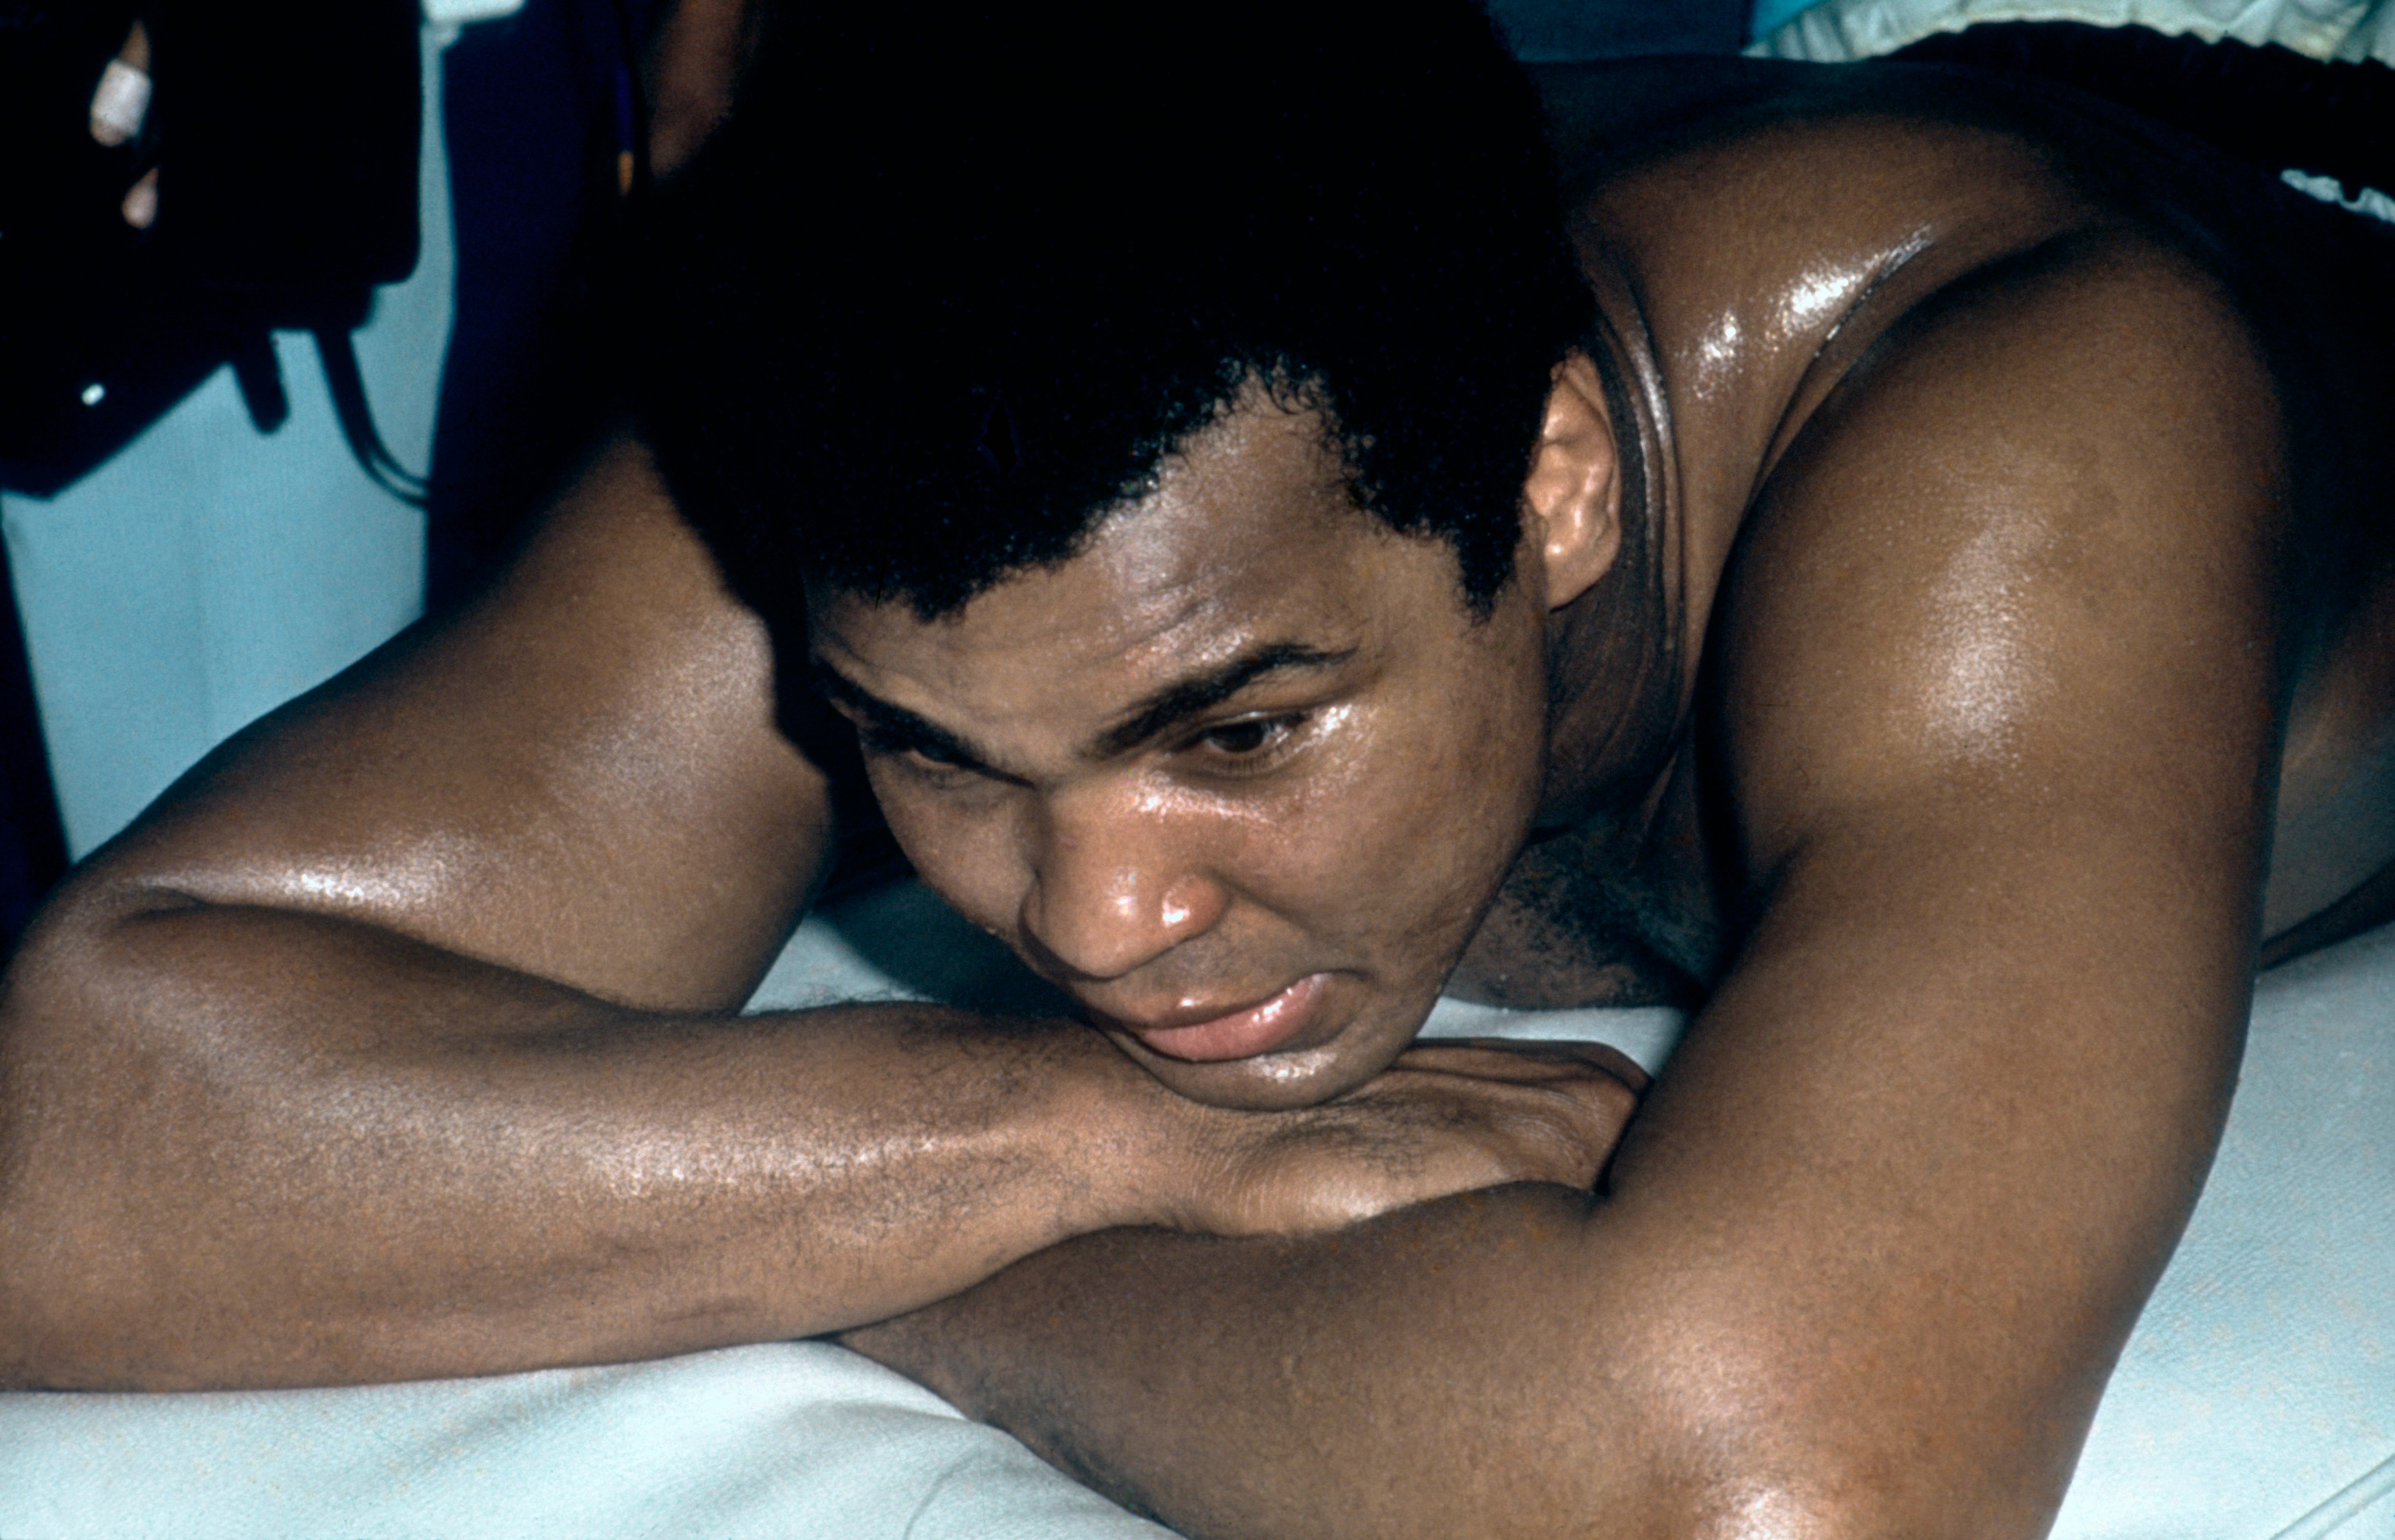 MUHAMMAD ALI (Geboren am 17. Januar 1942 als Cassius Marcellus Clay Jr. in Louisville, Kentucky), amerikanischer Schwergewichtsboxer. Ali gilt als berühmtester und größter Boxer aller Zeiten. Als Ikone des Boxsports und herausragender Athlet des 20. Jahrhunderts. Photo: Muhammad Ali (1975) Muhammad Ali (born 17 January 1942 as Cassius Clay), famous American boxer and former three-time World Heavyweight Champion and winner of an Olympic Light-heavyweight gold medal. Ali is the biggest sporting legend of the 20th century., Image: 136777891, License: Rights-managed, Restrictions: , Model Release: no, Credit line: Profimedia, United Archives